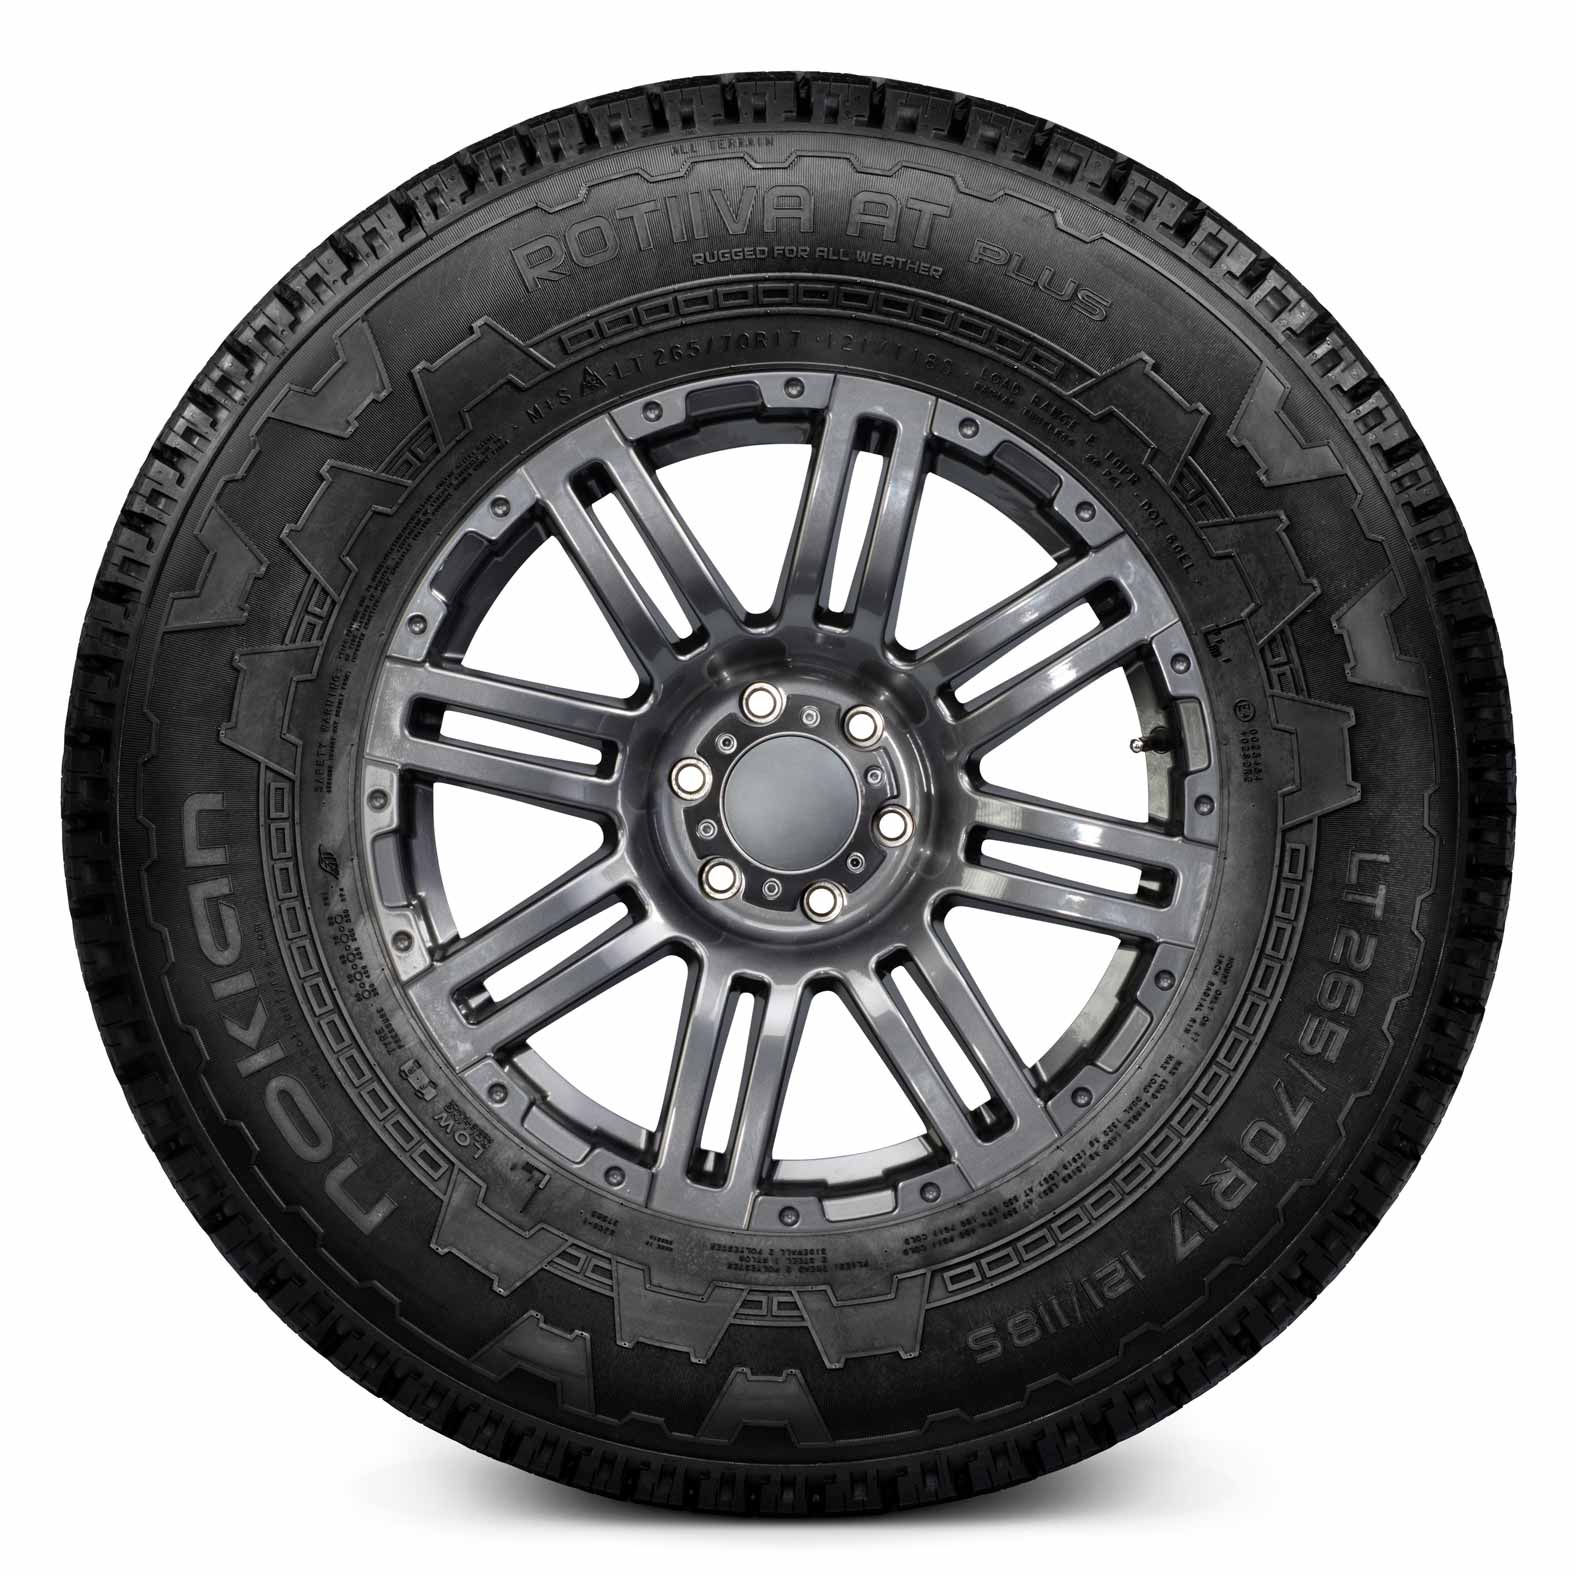 Nokian Rotiiva AT PLUS Tires for All-Terrain | Kal Tire